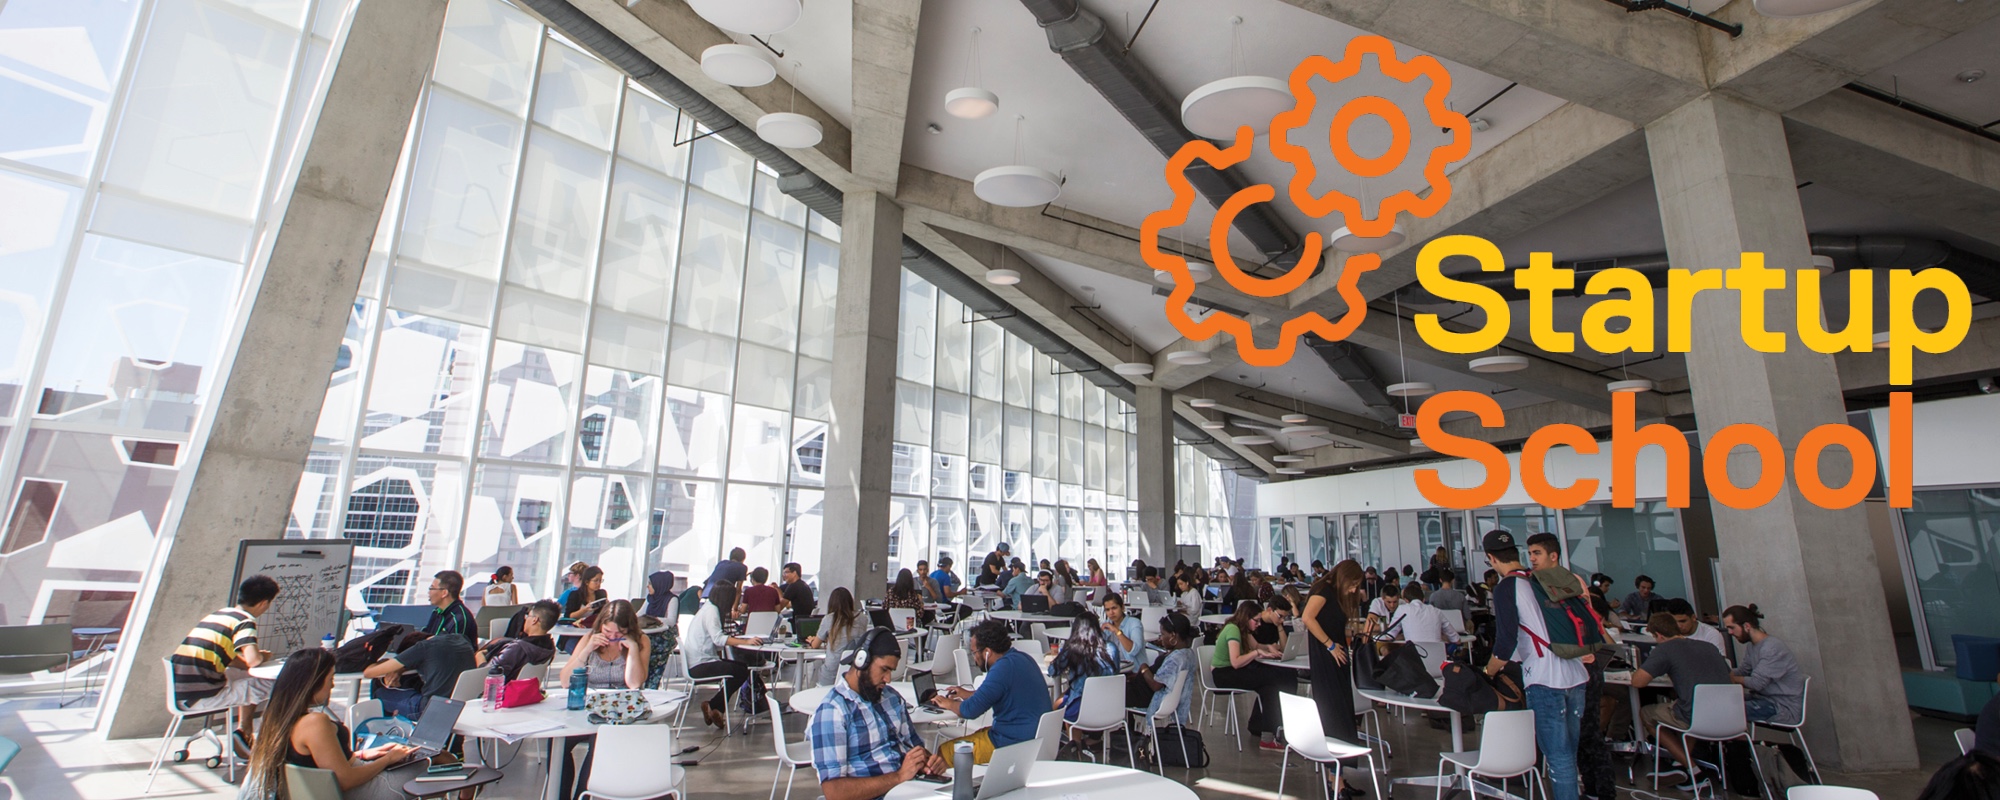 Startup School logo over an image of students working in an open space